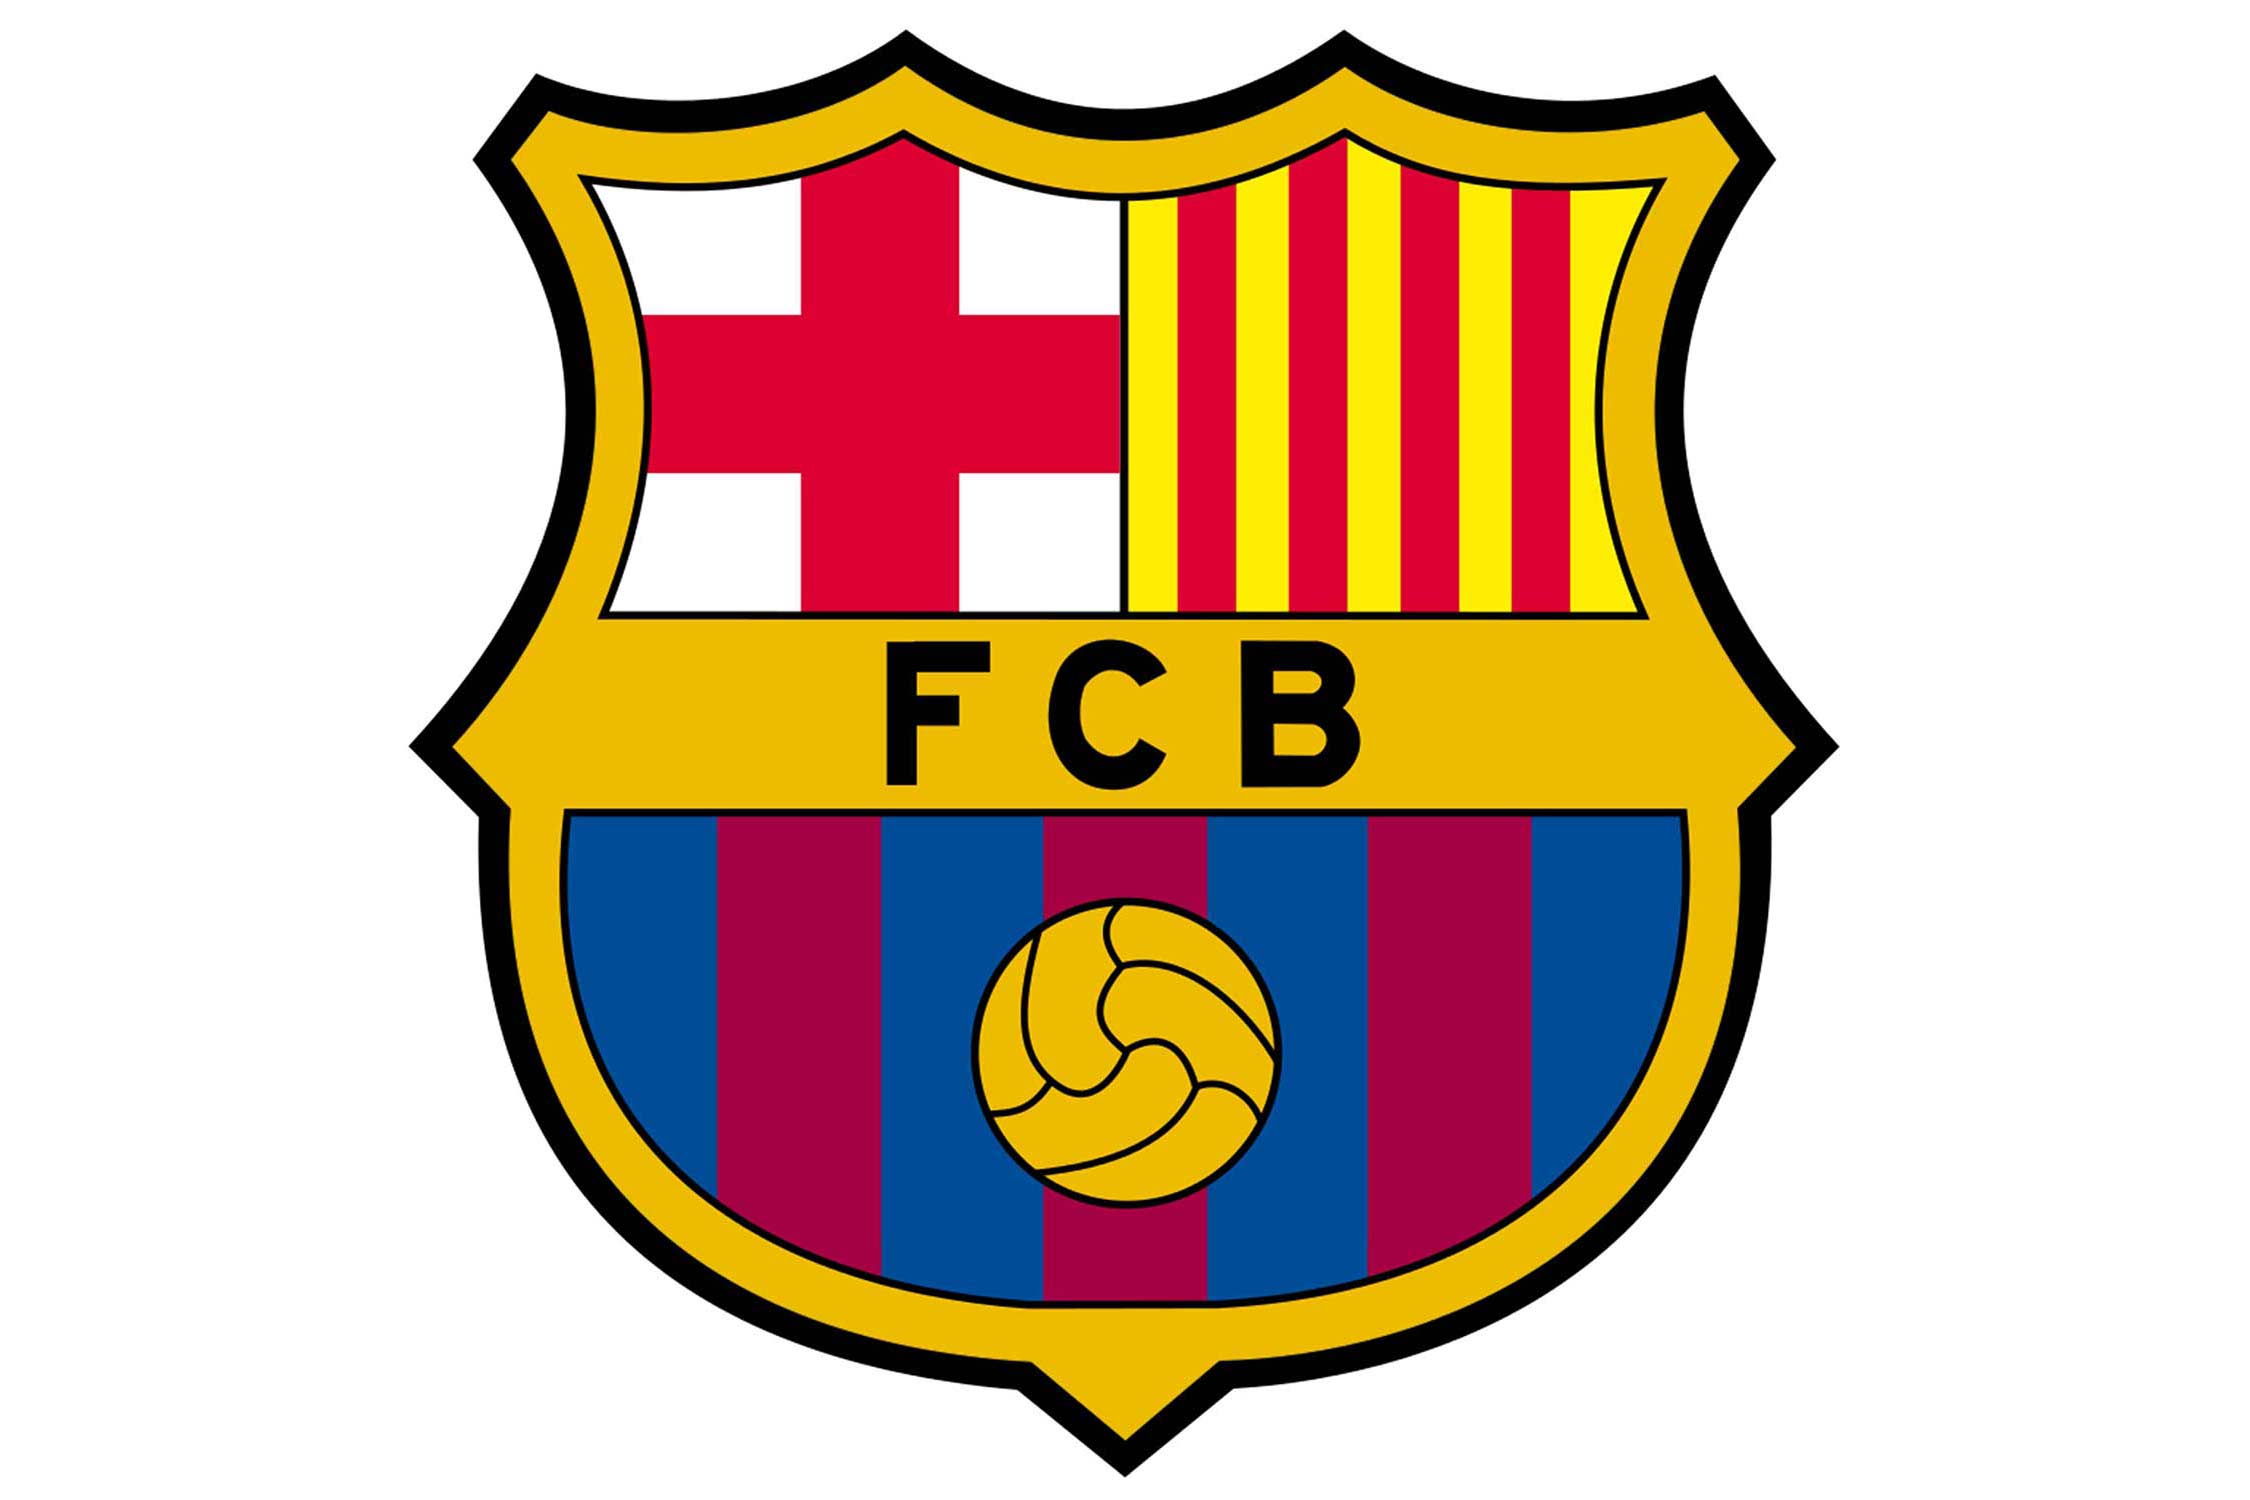 Soccer Crest Logo - Hidden explanations for soccer clubs' crests around the world